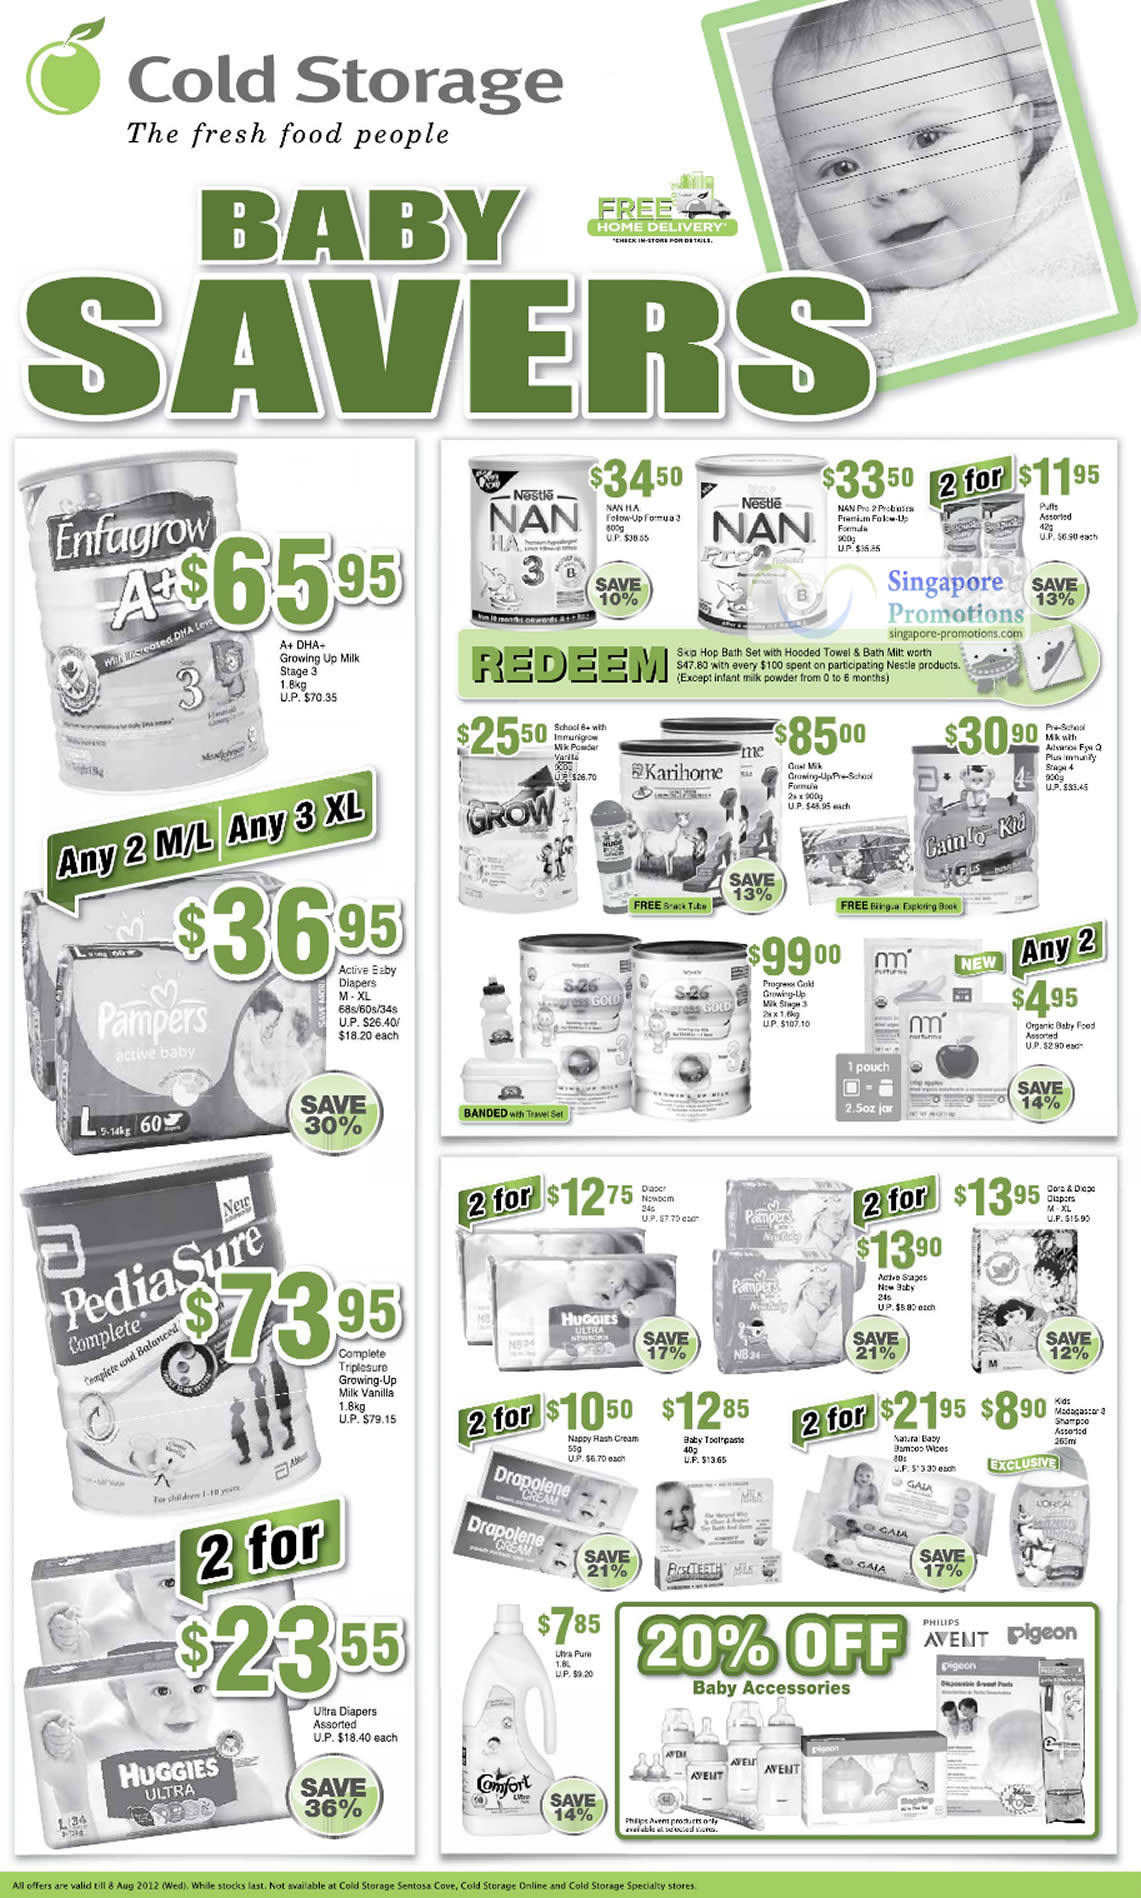 Featured image for Cold Storage Baby Savers & Wine Promotion Offers 3 - 8 Aug 2012